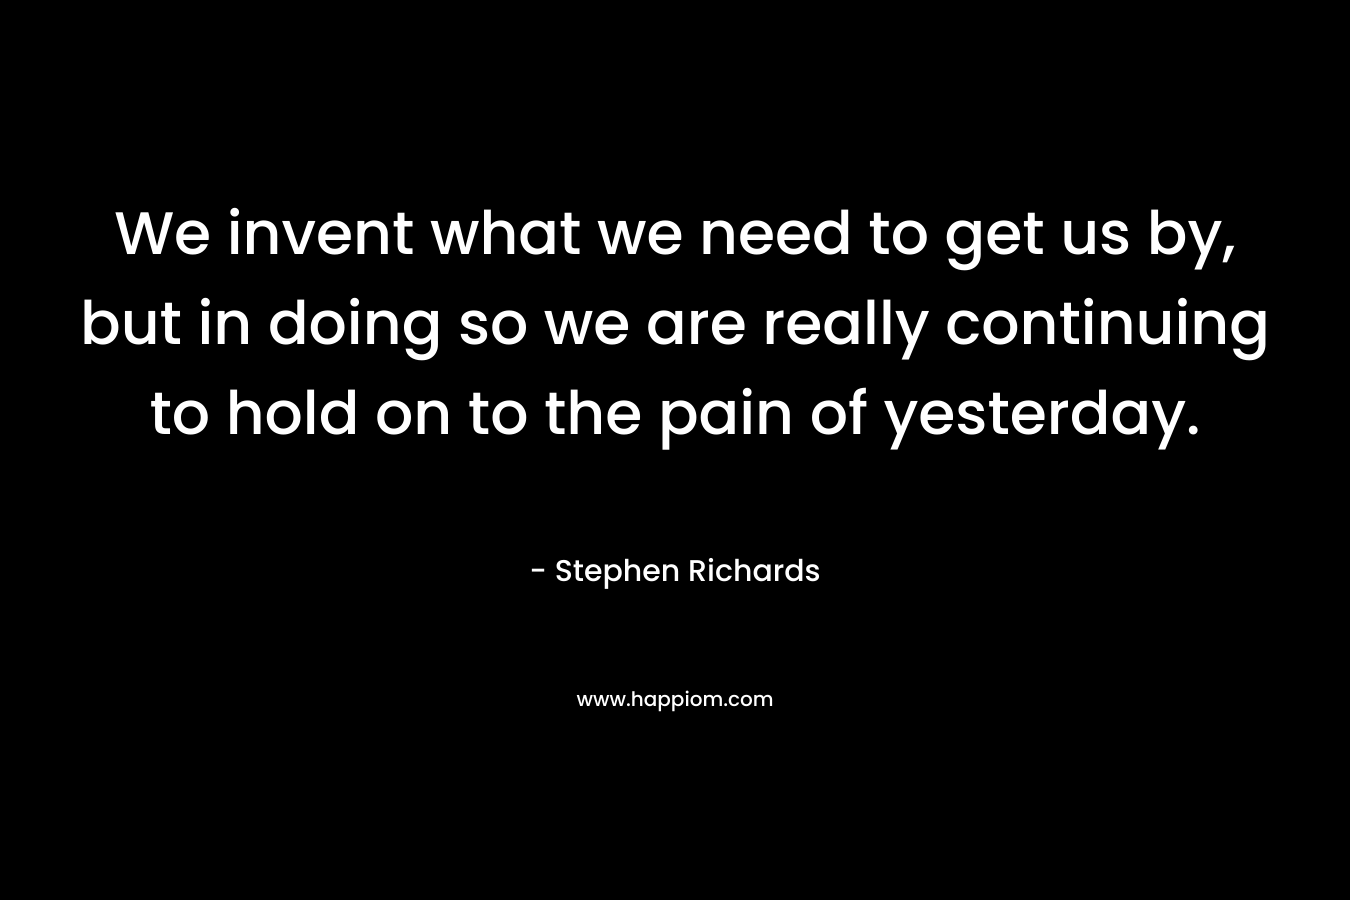 We invent what we need to get us by, but in doing so we are really continuing to hold on to the pain of yesterday.